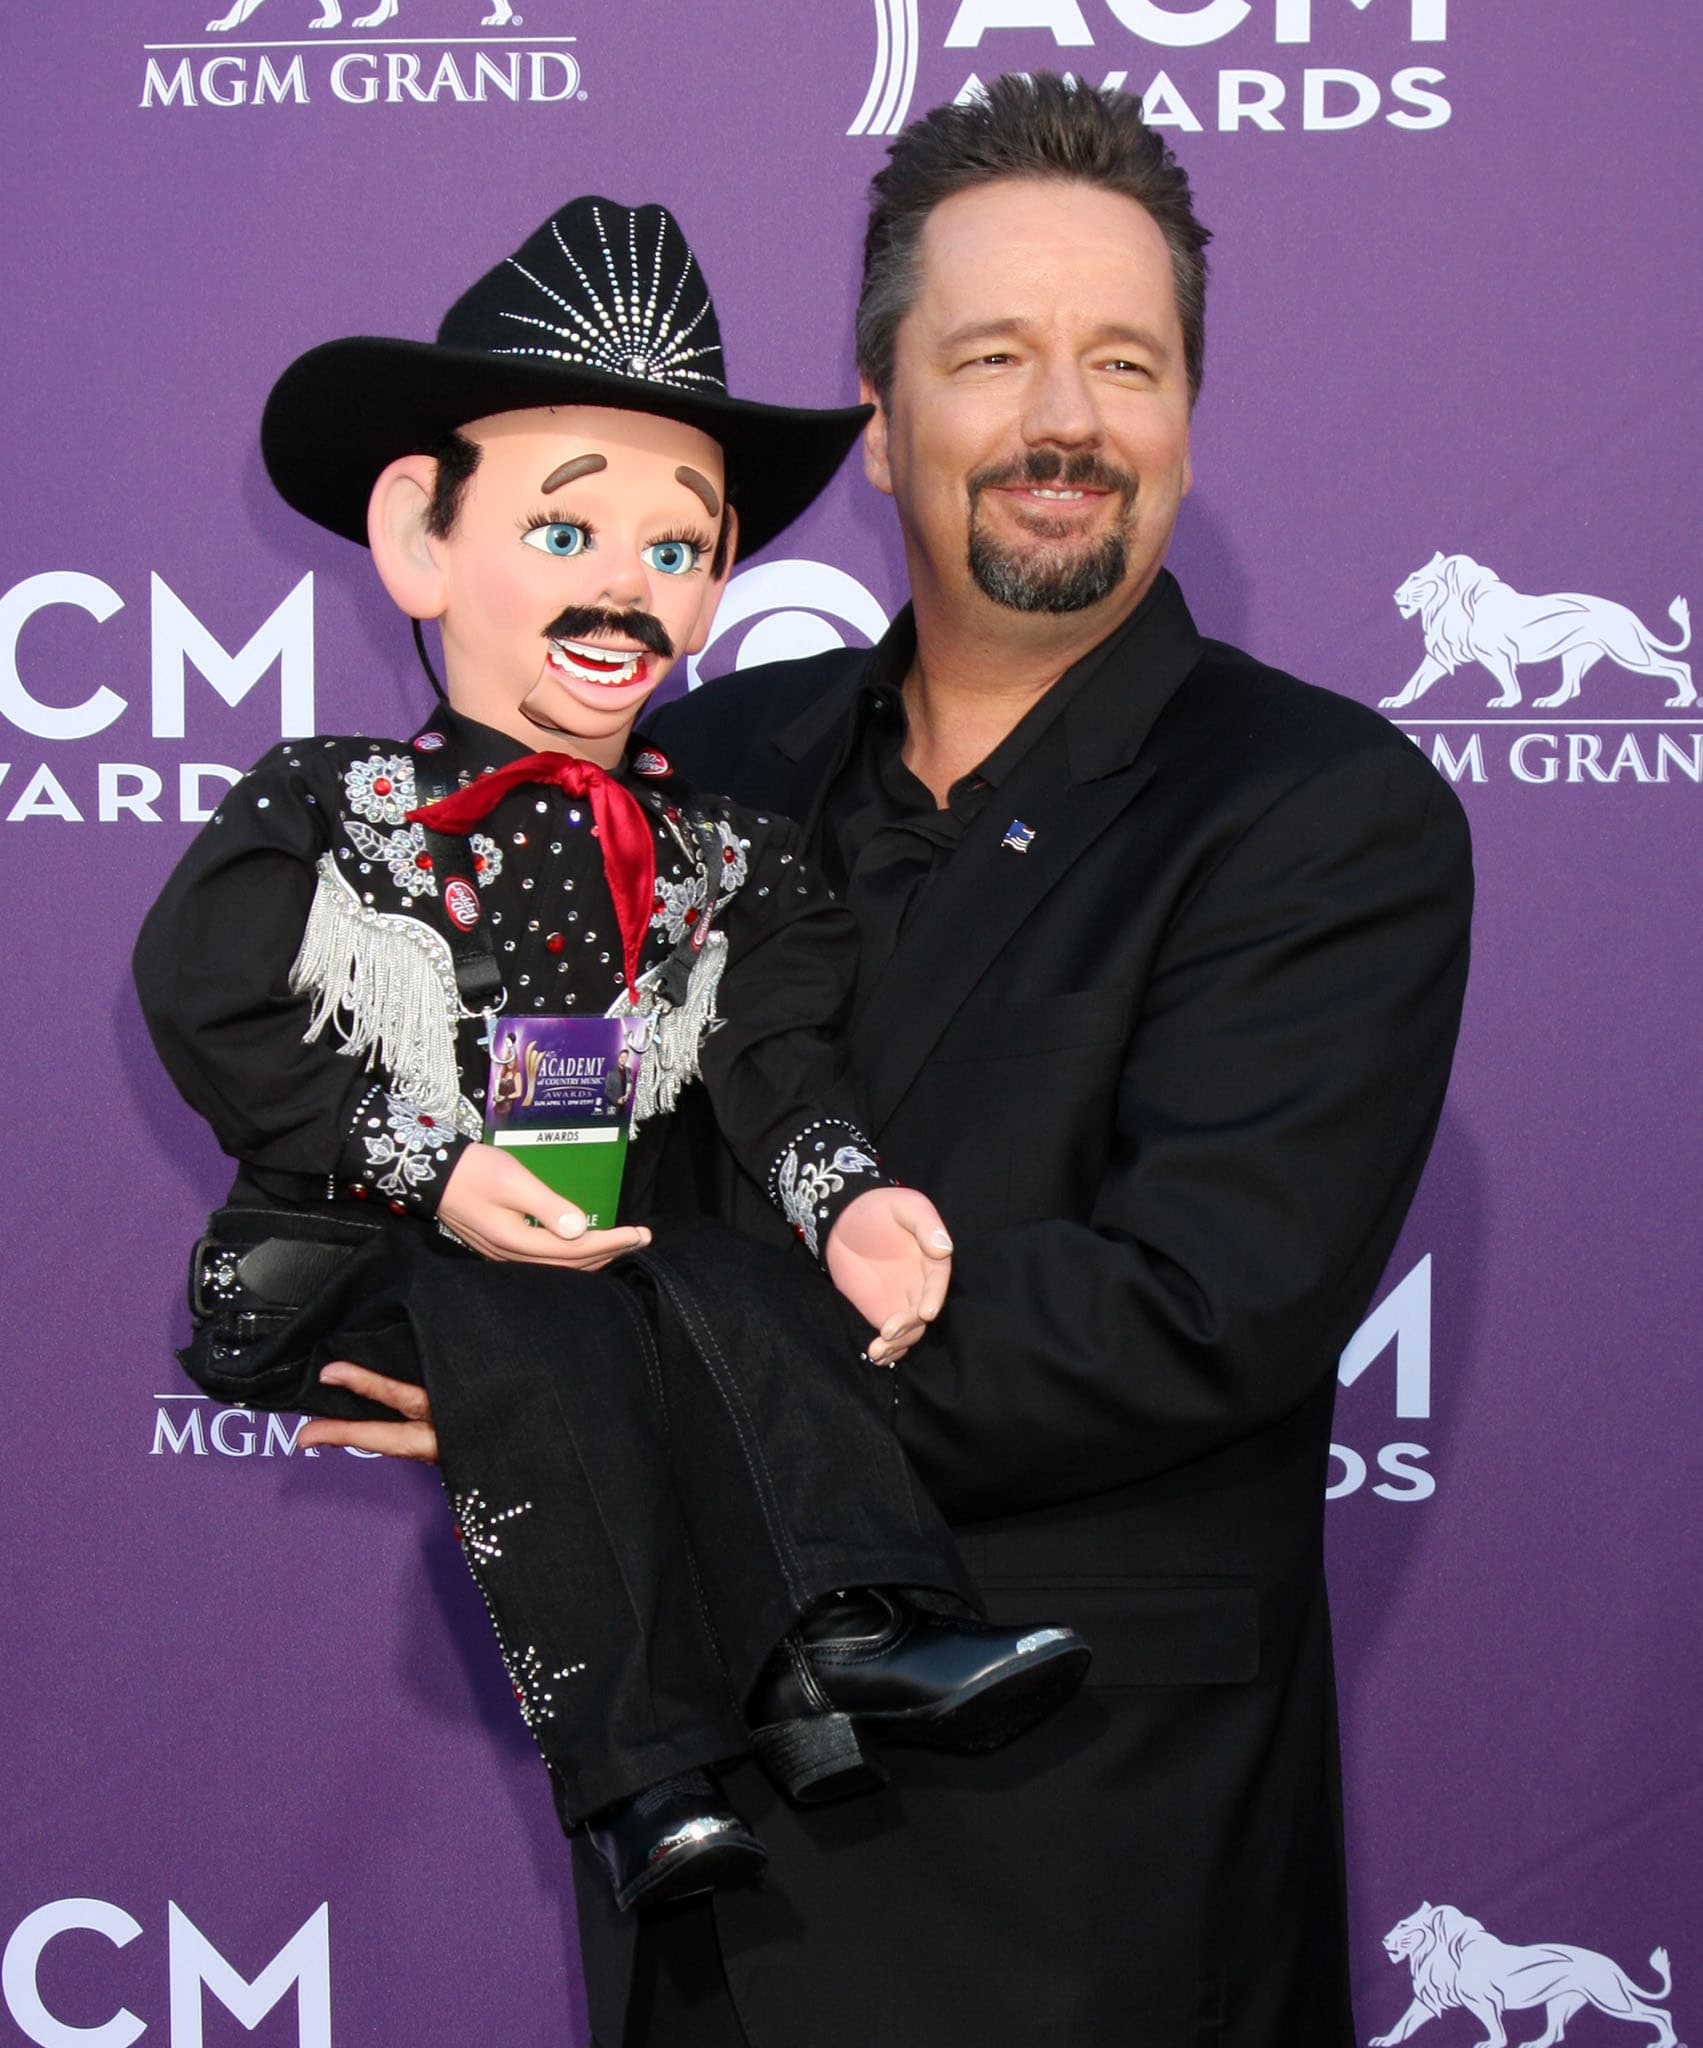 Terry Fator combines ventriloquism and singing with comedy and gained national recognition for his talent after winning the second season of America's Got Talent